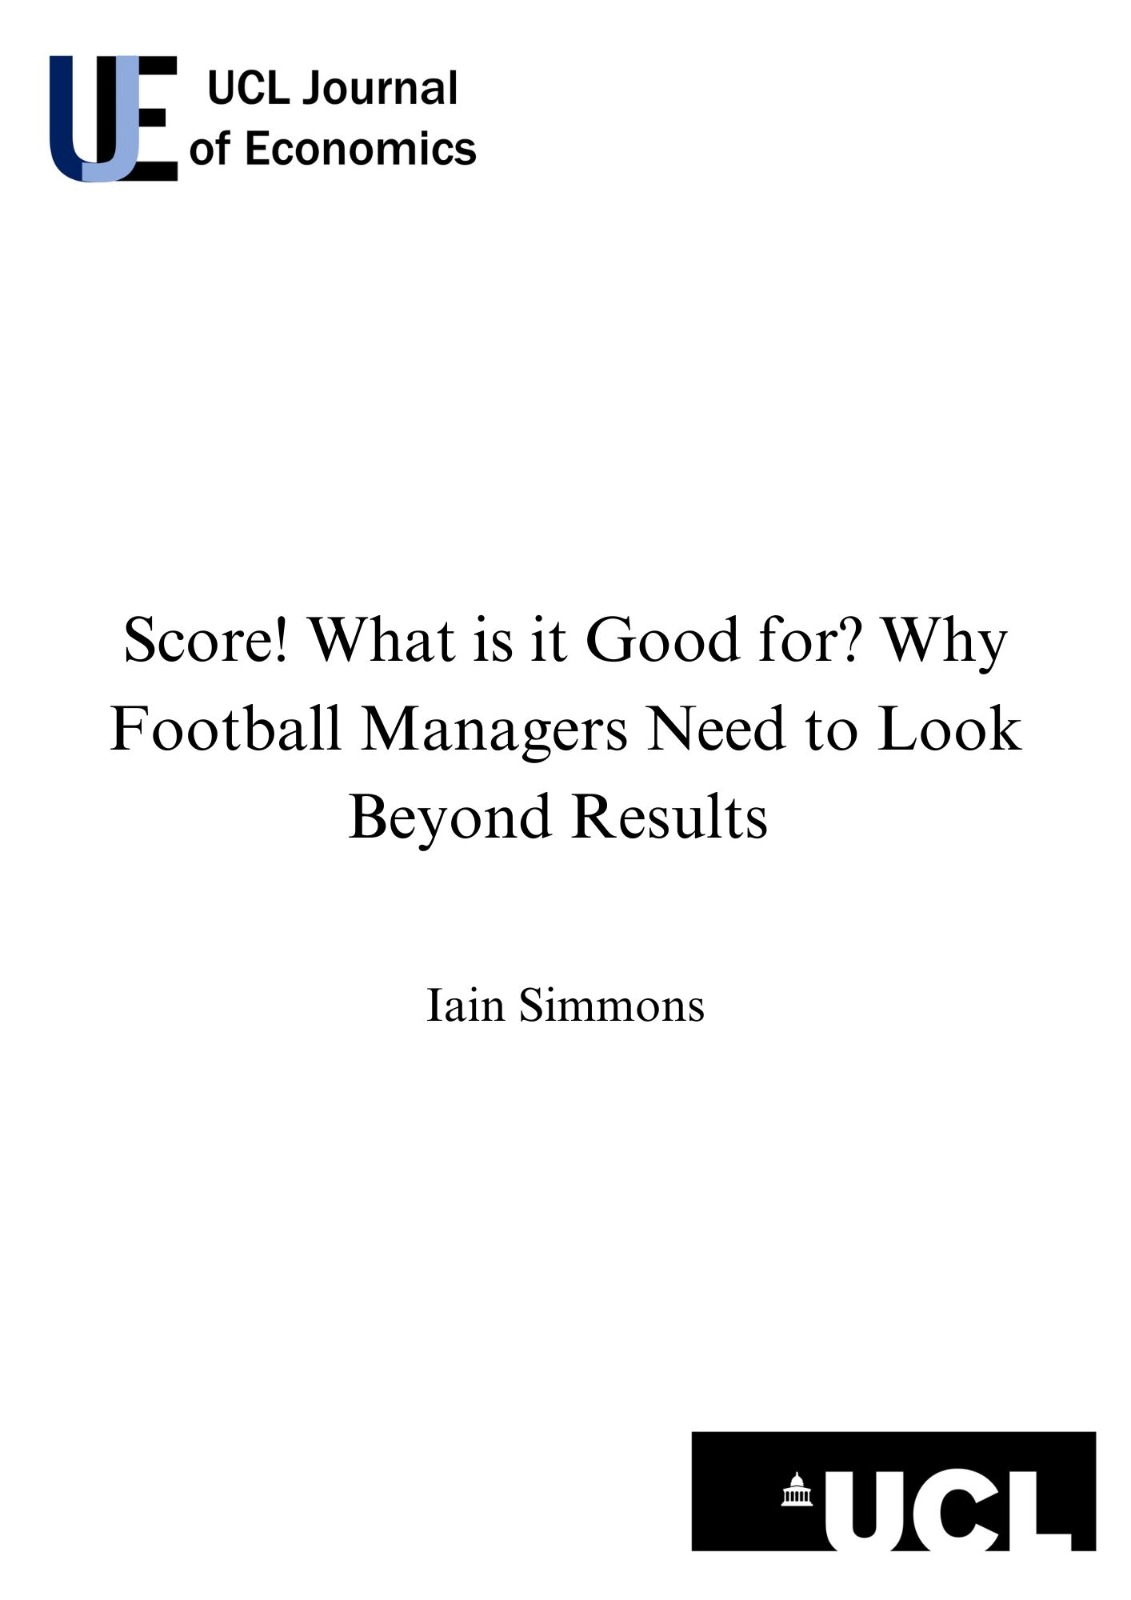 Score! What is it Good for? Why Football Managers Need to Look Beyond Results